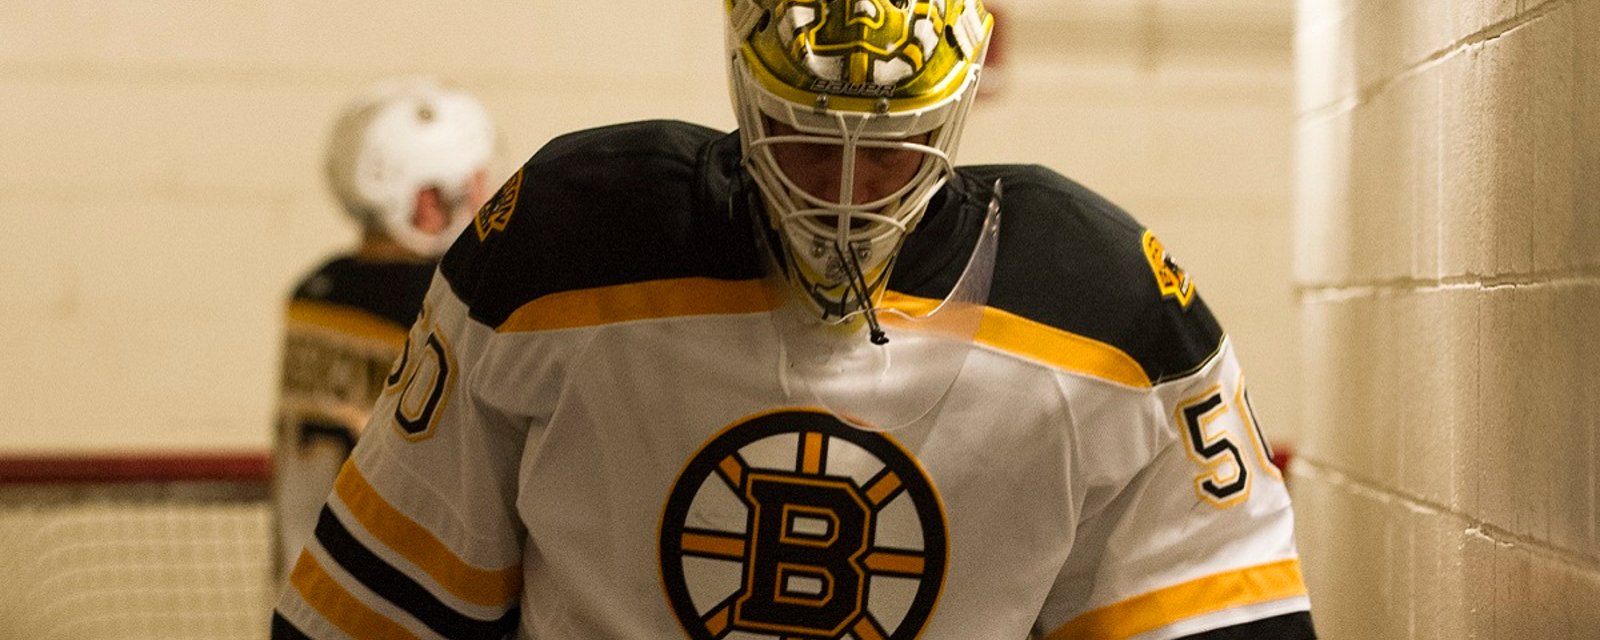 Tuukka Rask has pulled out of the NHL playoffs.